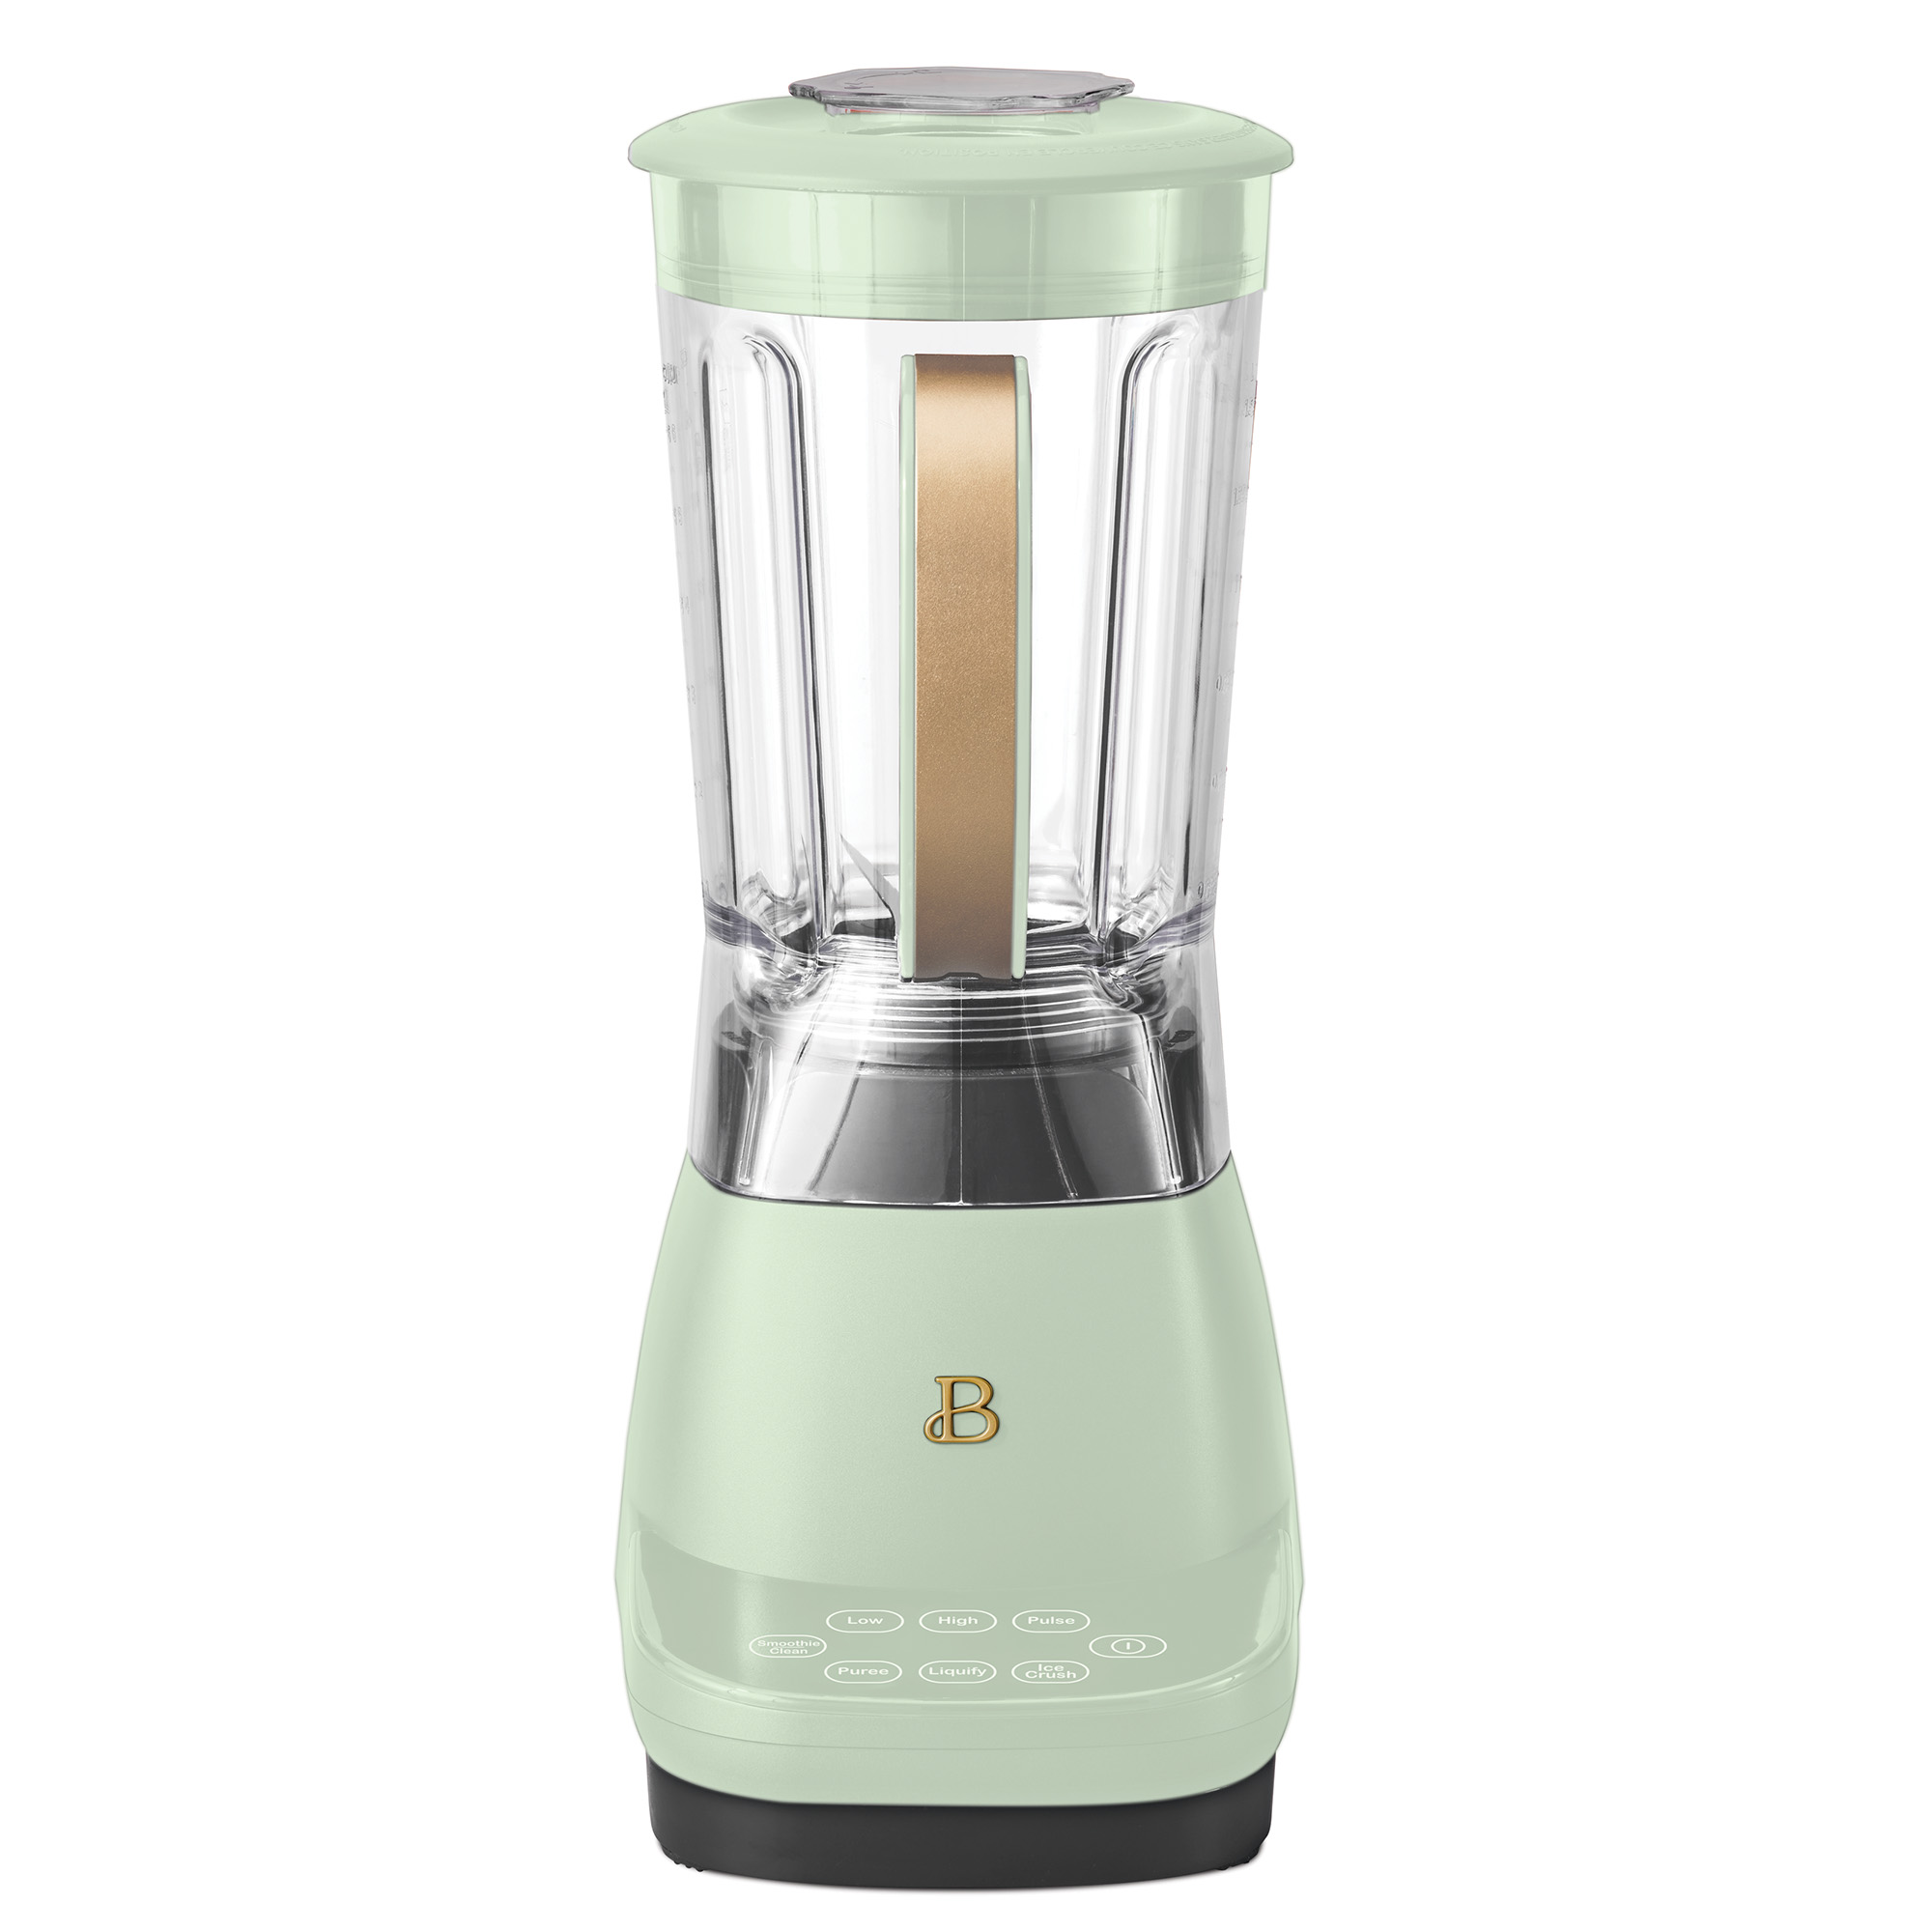 Beautiful High Performance Touchscreen Blender, Sage Green by Drew Barrymore - image 1 of 8